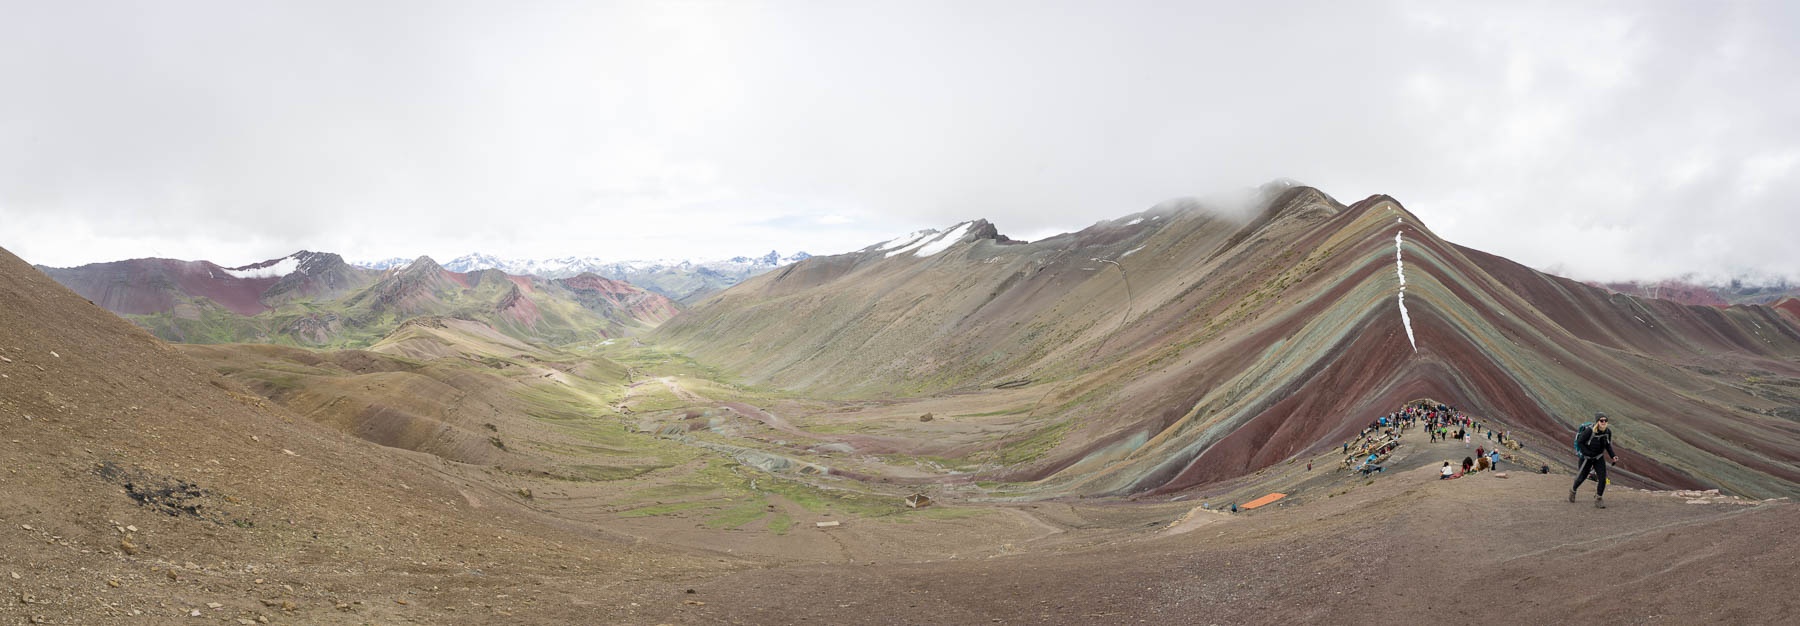 Looking west from Vinicunca